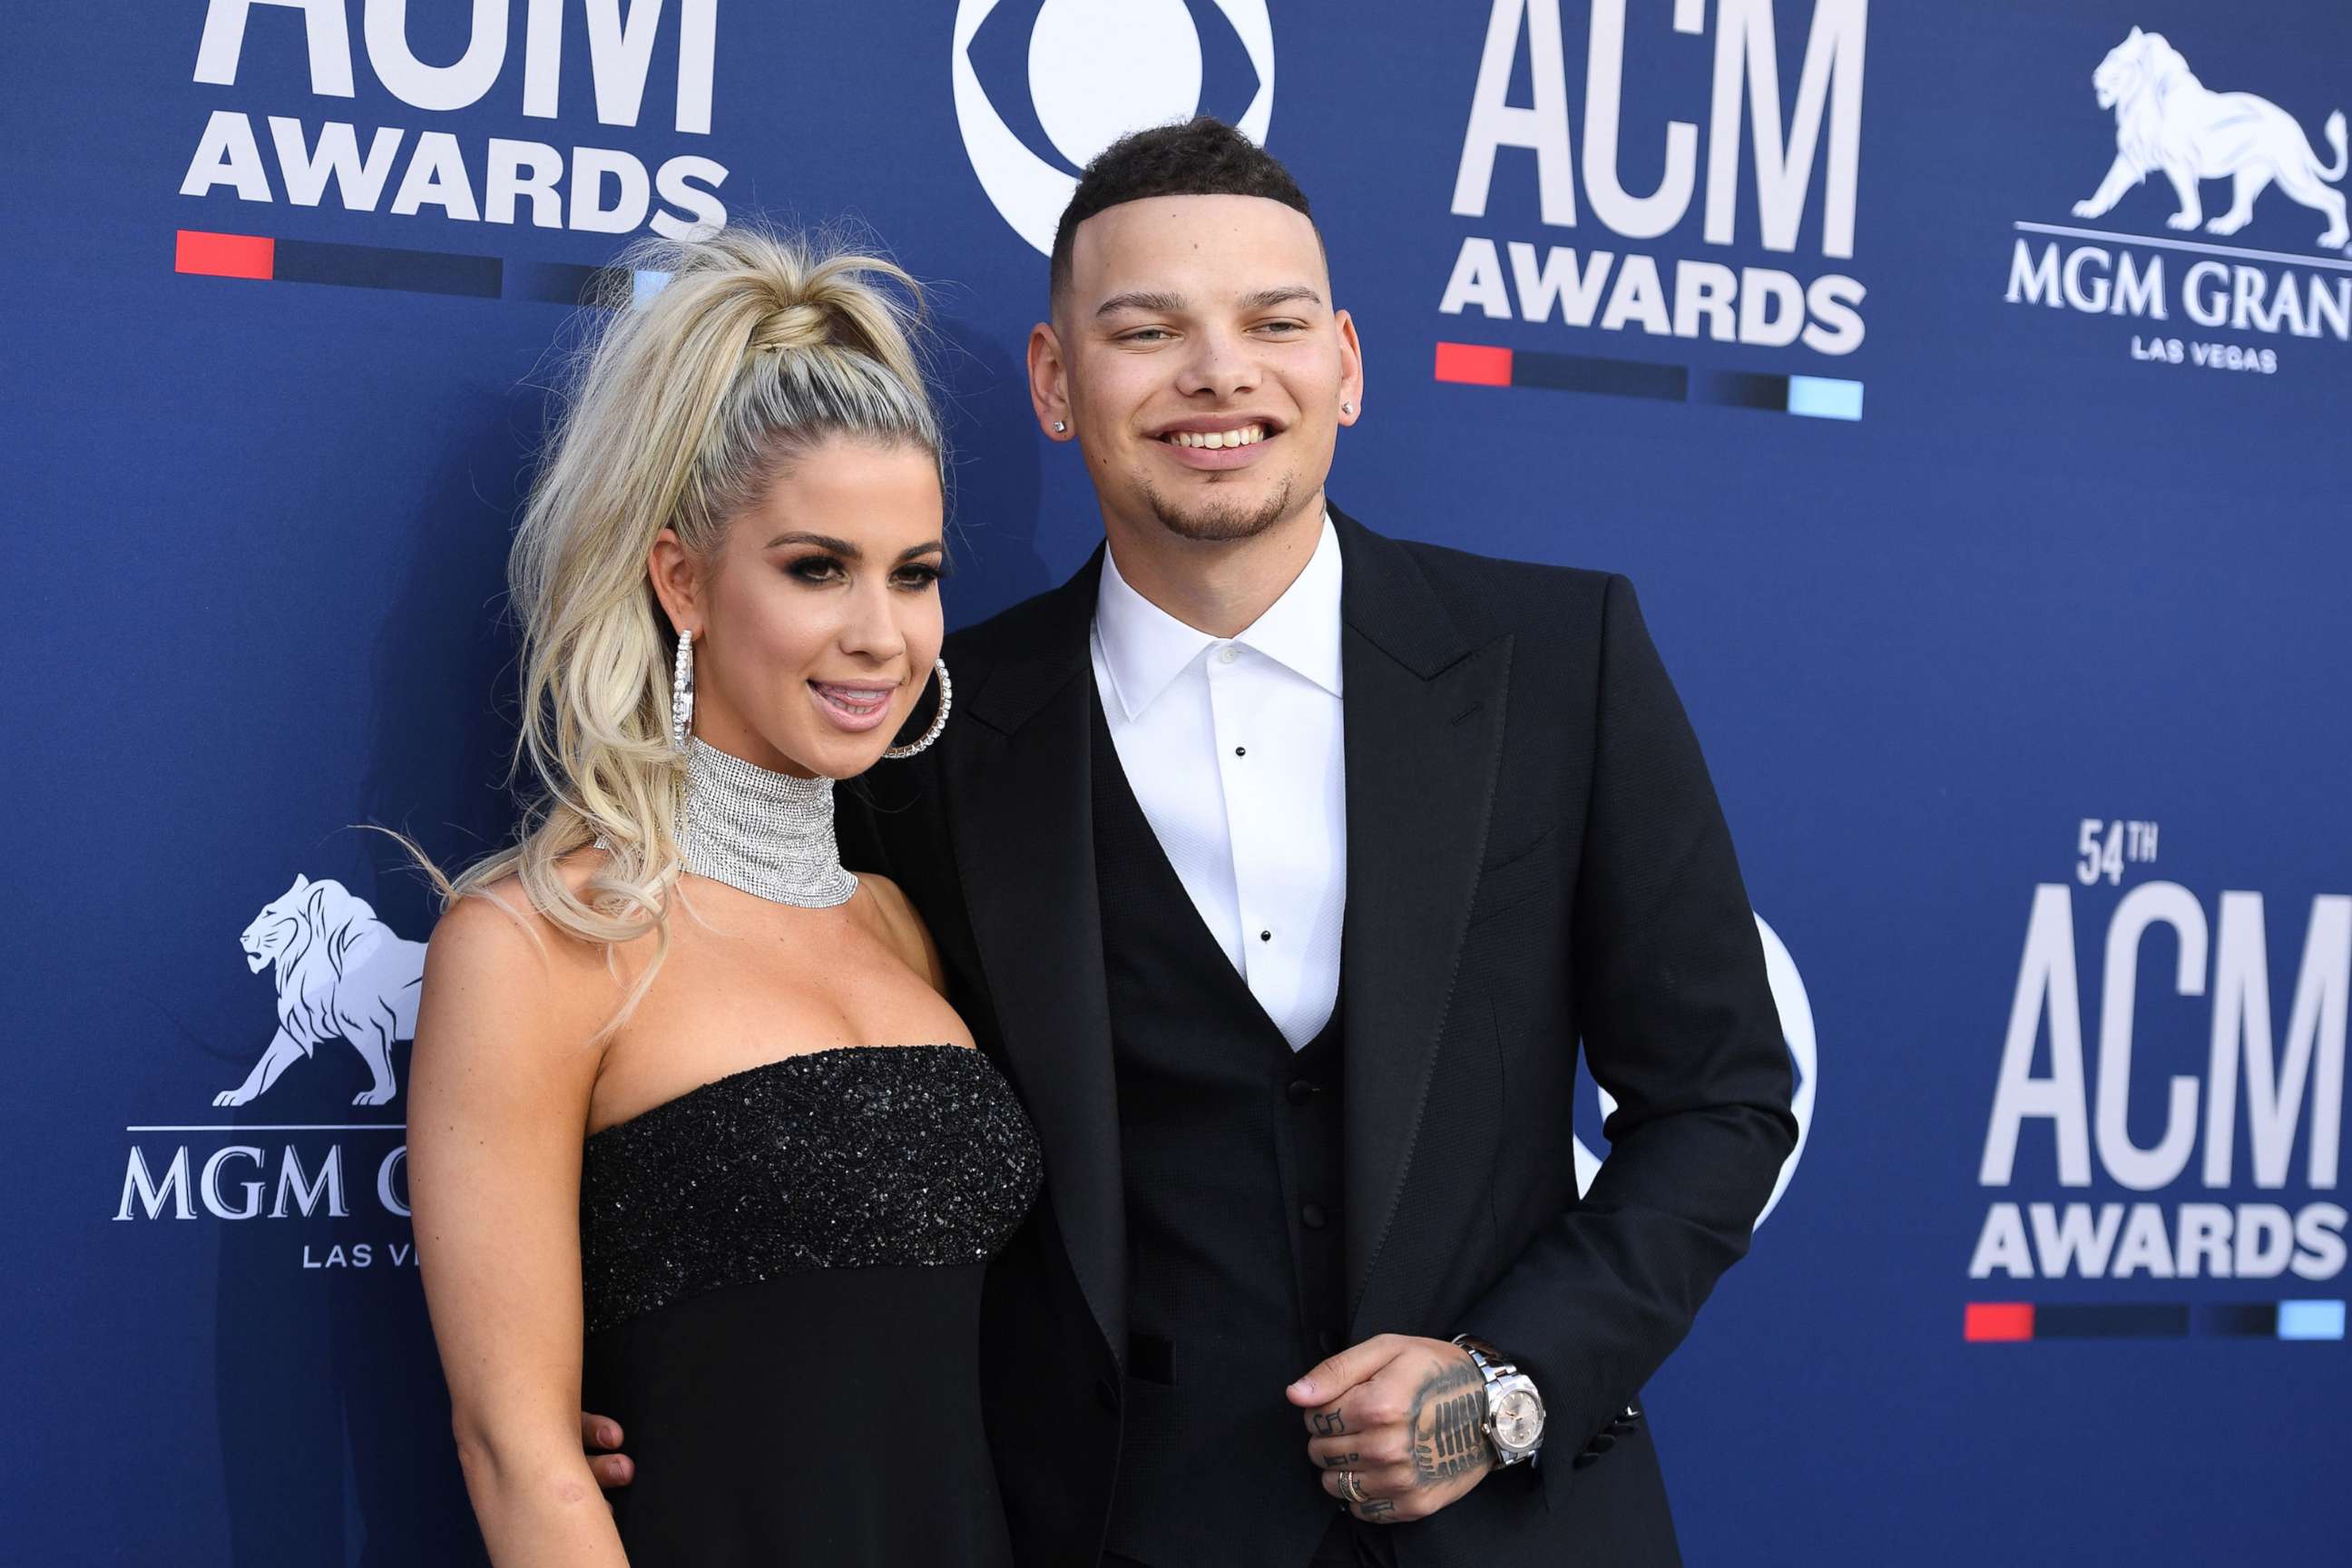 PHOTO: Kane Brown and his wife Katelyn Brown arrive for the 54th Academy of Country Music Awards on April 7, 2019, at the MGM Grand Garden Arena in Las Vegas.